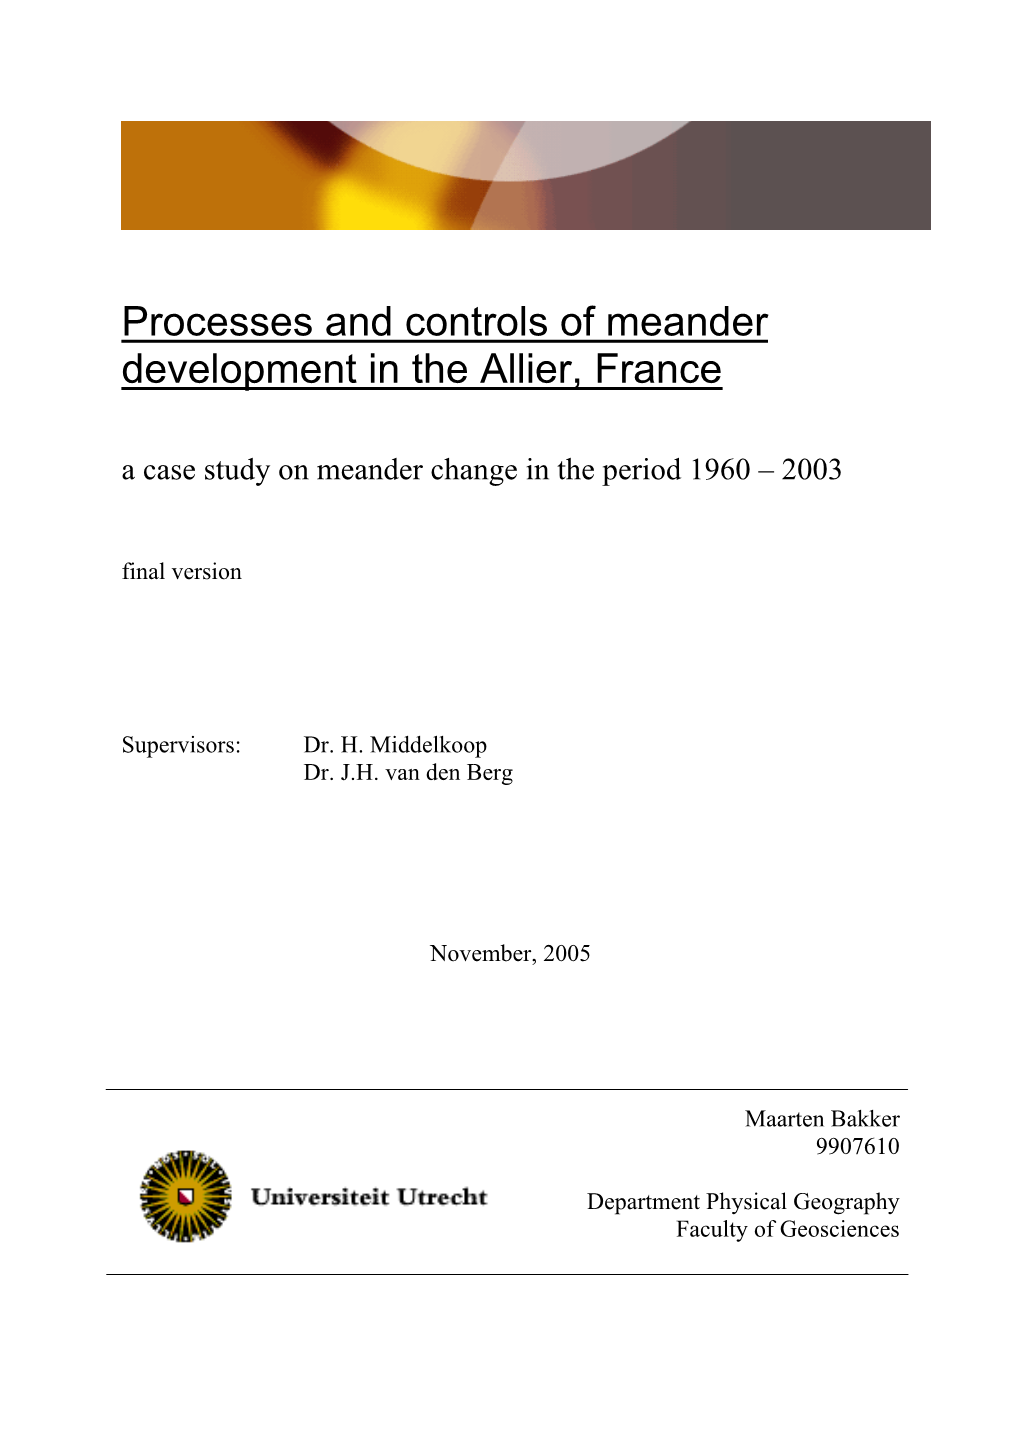 Processes and Controls of Meander Development in the Allier, France